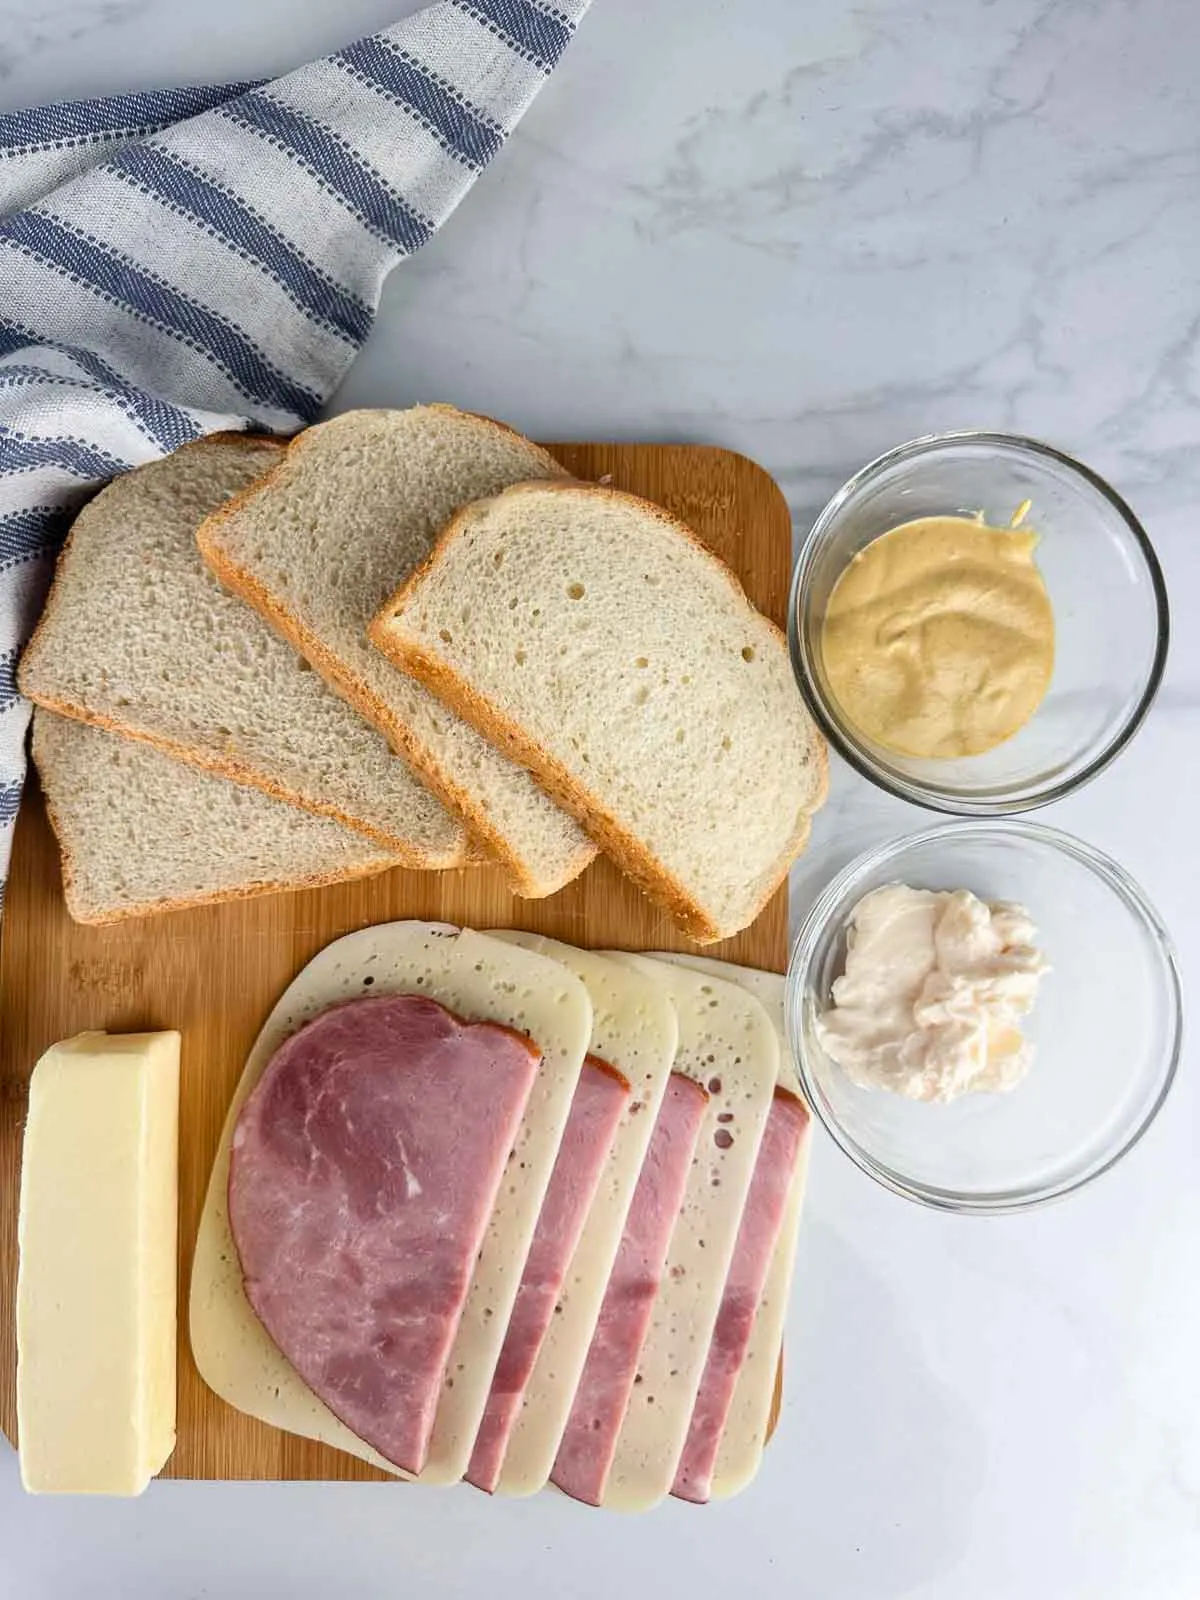 Ingredients for a ham and cheese panini: sturdy bread, condiments, butter, ham, and cheese